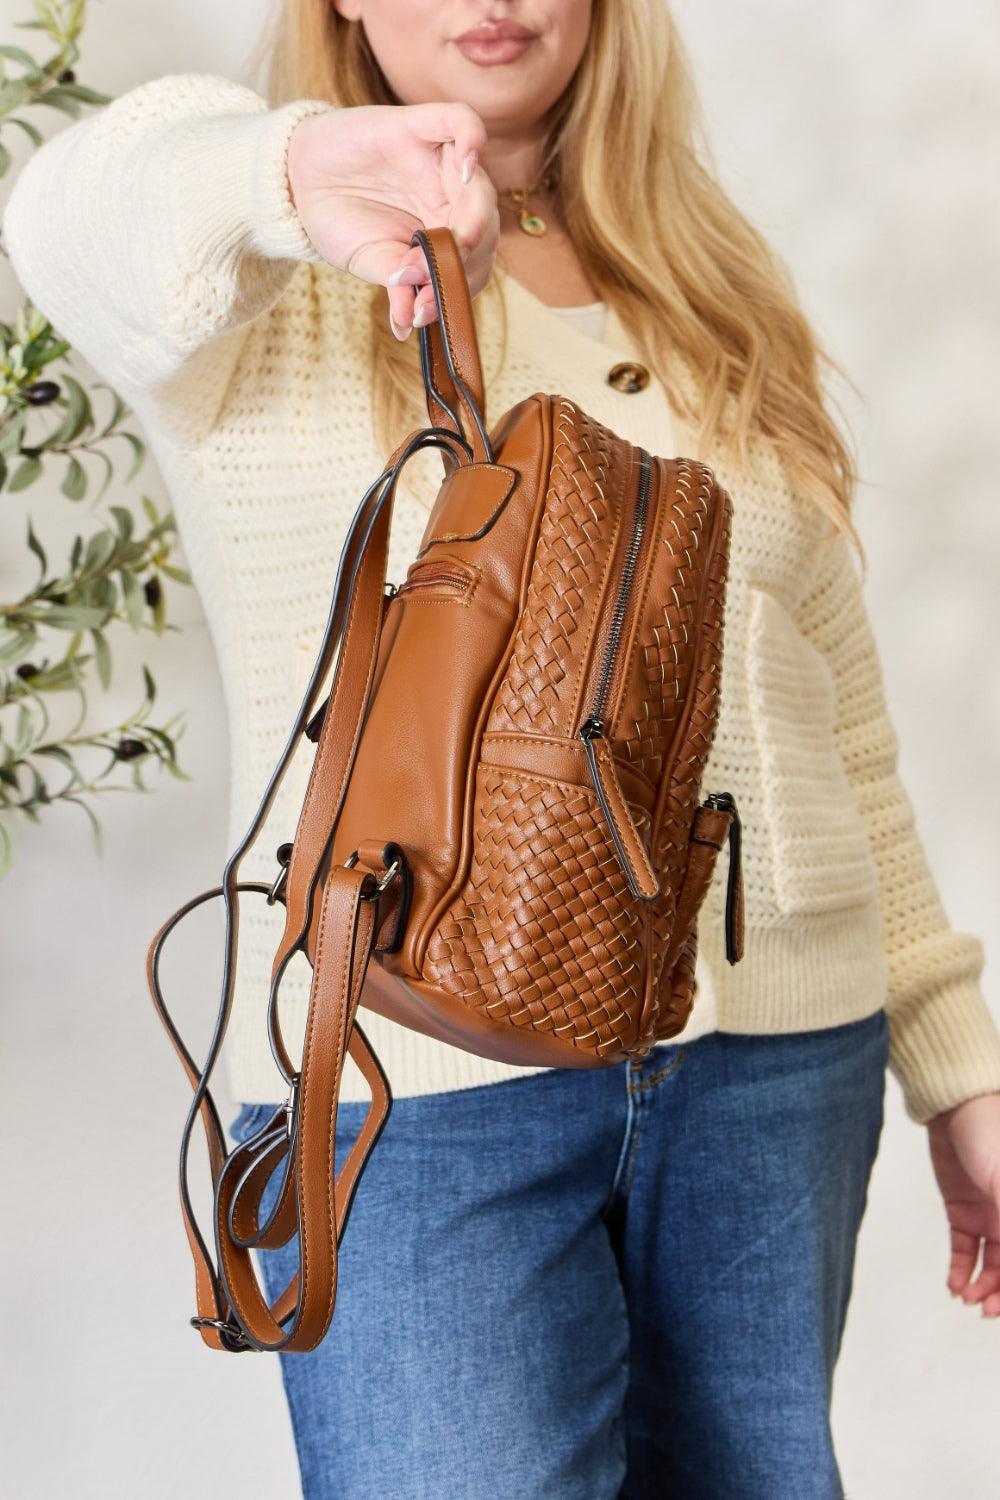 SHOMICO PU Leather Woven Backpack - Anchored Feather Boutique